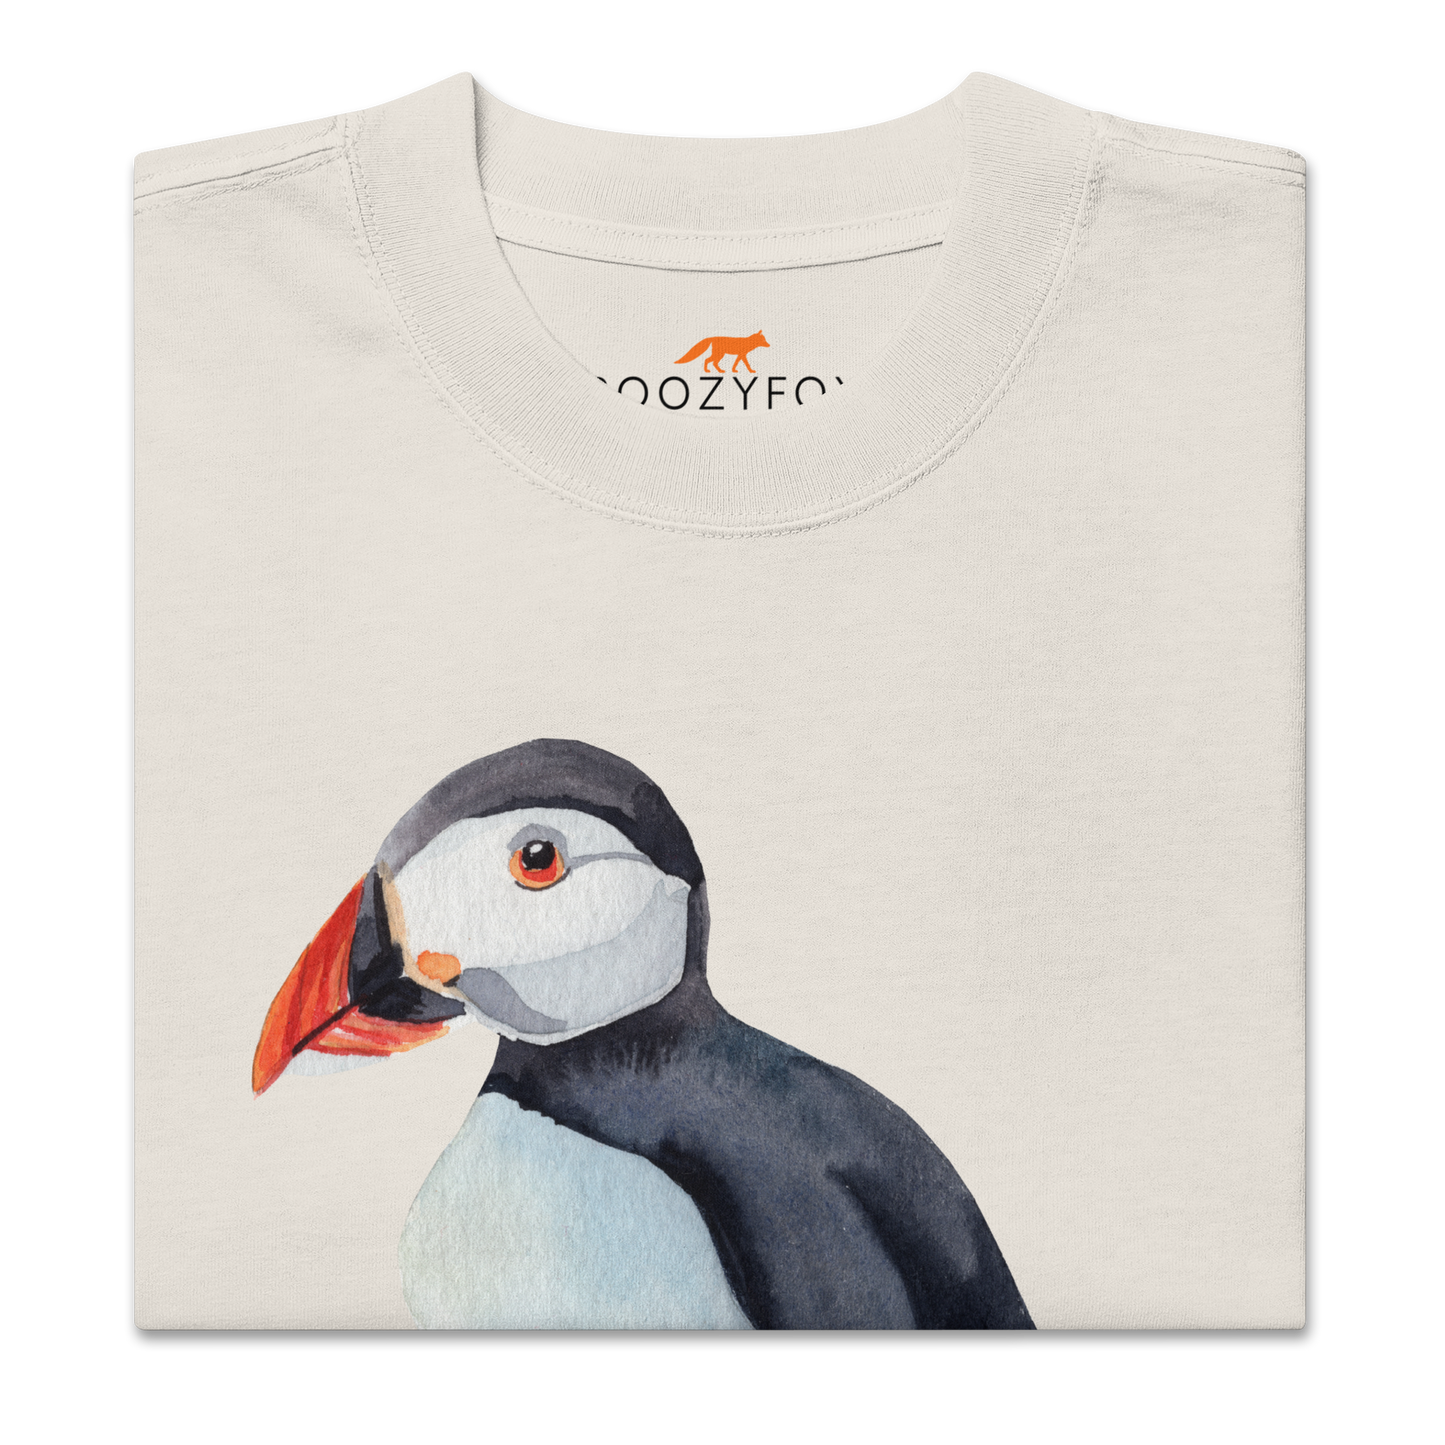 Product details of a Faded Bone Puffin Oversized T-Shirt featuring a comic Puuffin' graphic on the chest - Funny Graphic Puffin Oversized Tees - Boozy Fox